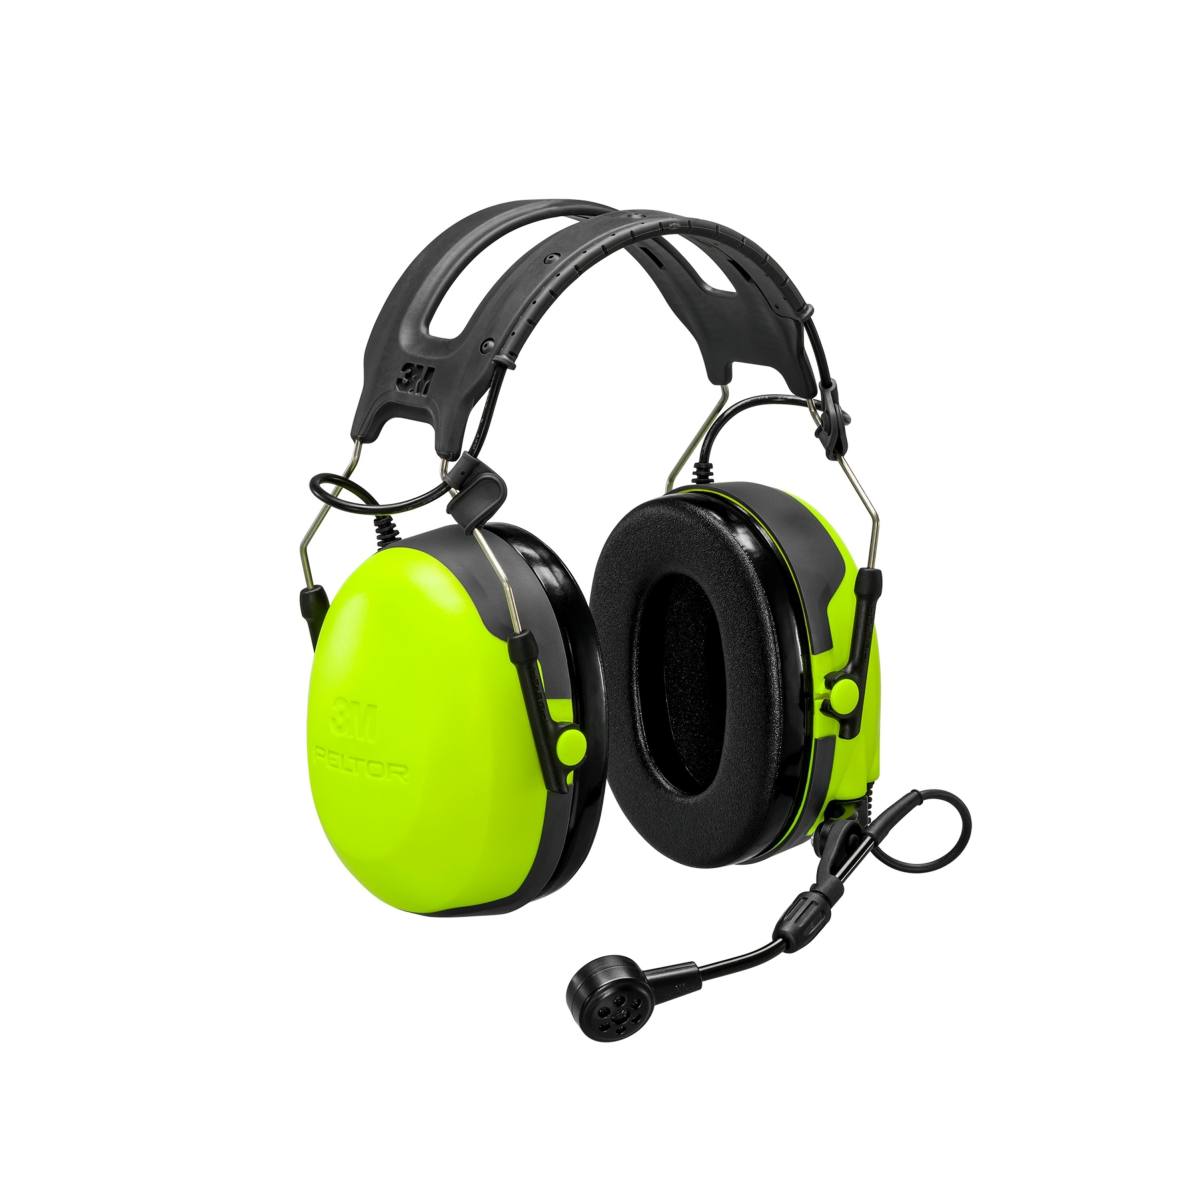 3M PELTOR CH-3 Hearing protection headset with PTT, headband, yellow, MT74H52A-111